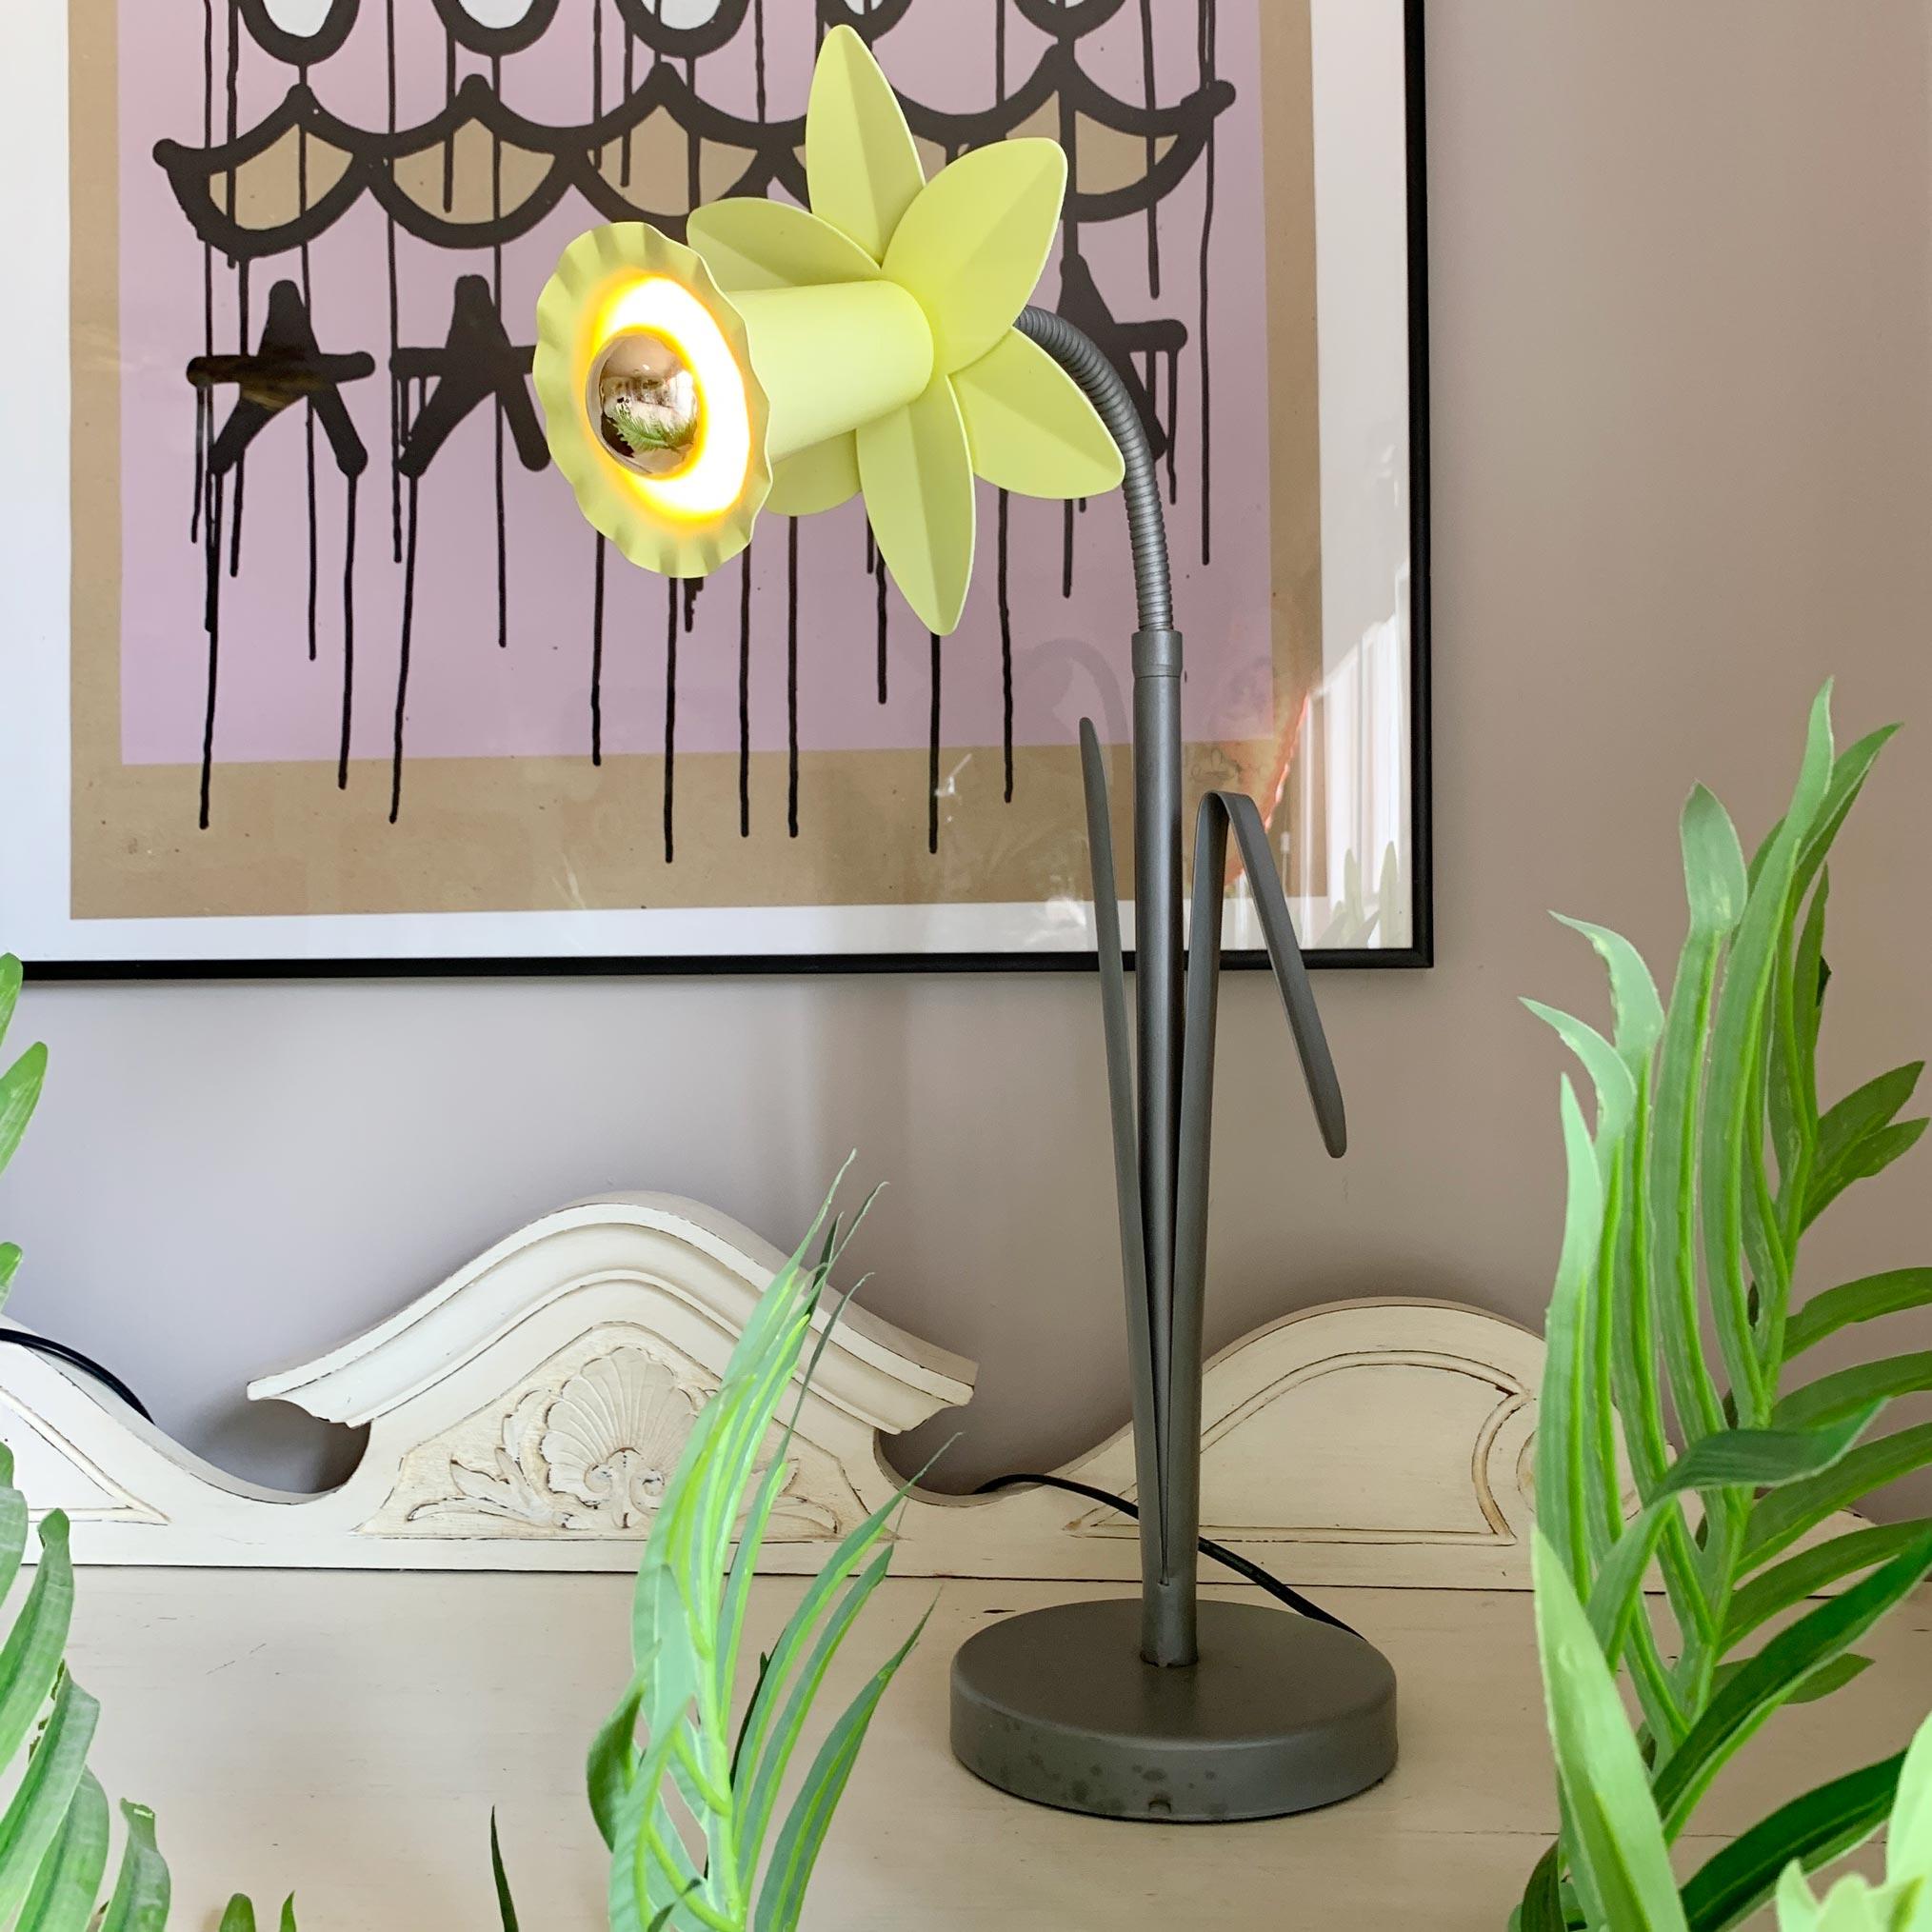 Iconic 'Bliss' designer daffodil table lamp
Sherbet lemon yellow metal daffodil shaped lamp with silver leaves, designed in the UK by Bliss in the 1980s
This rare example is in great condition

Measures: 55cm height (as shown in photograph) 69cm